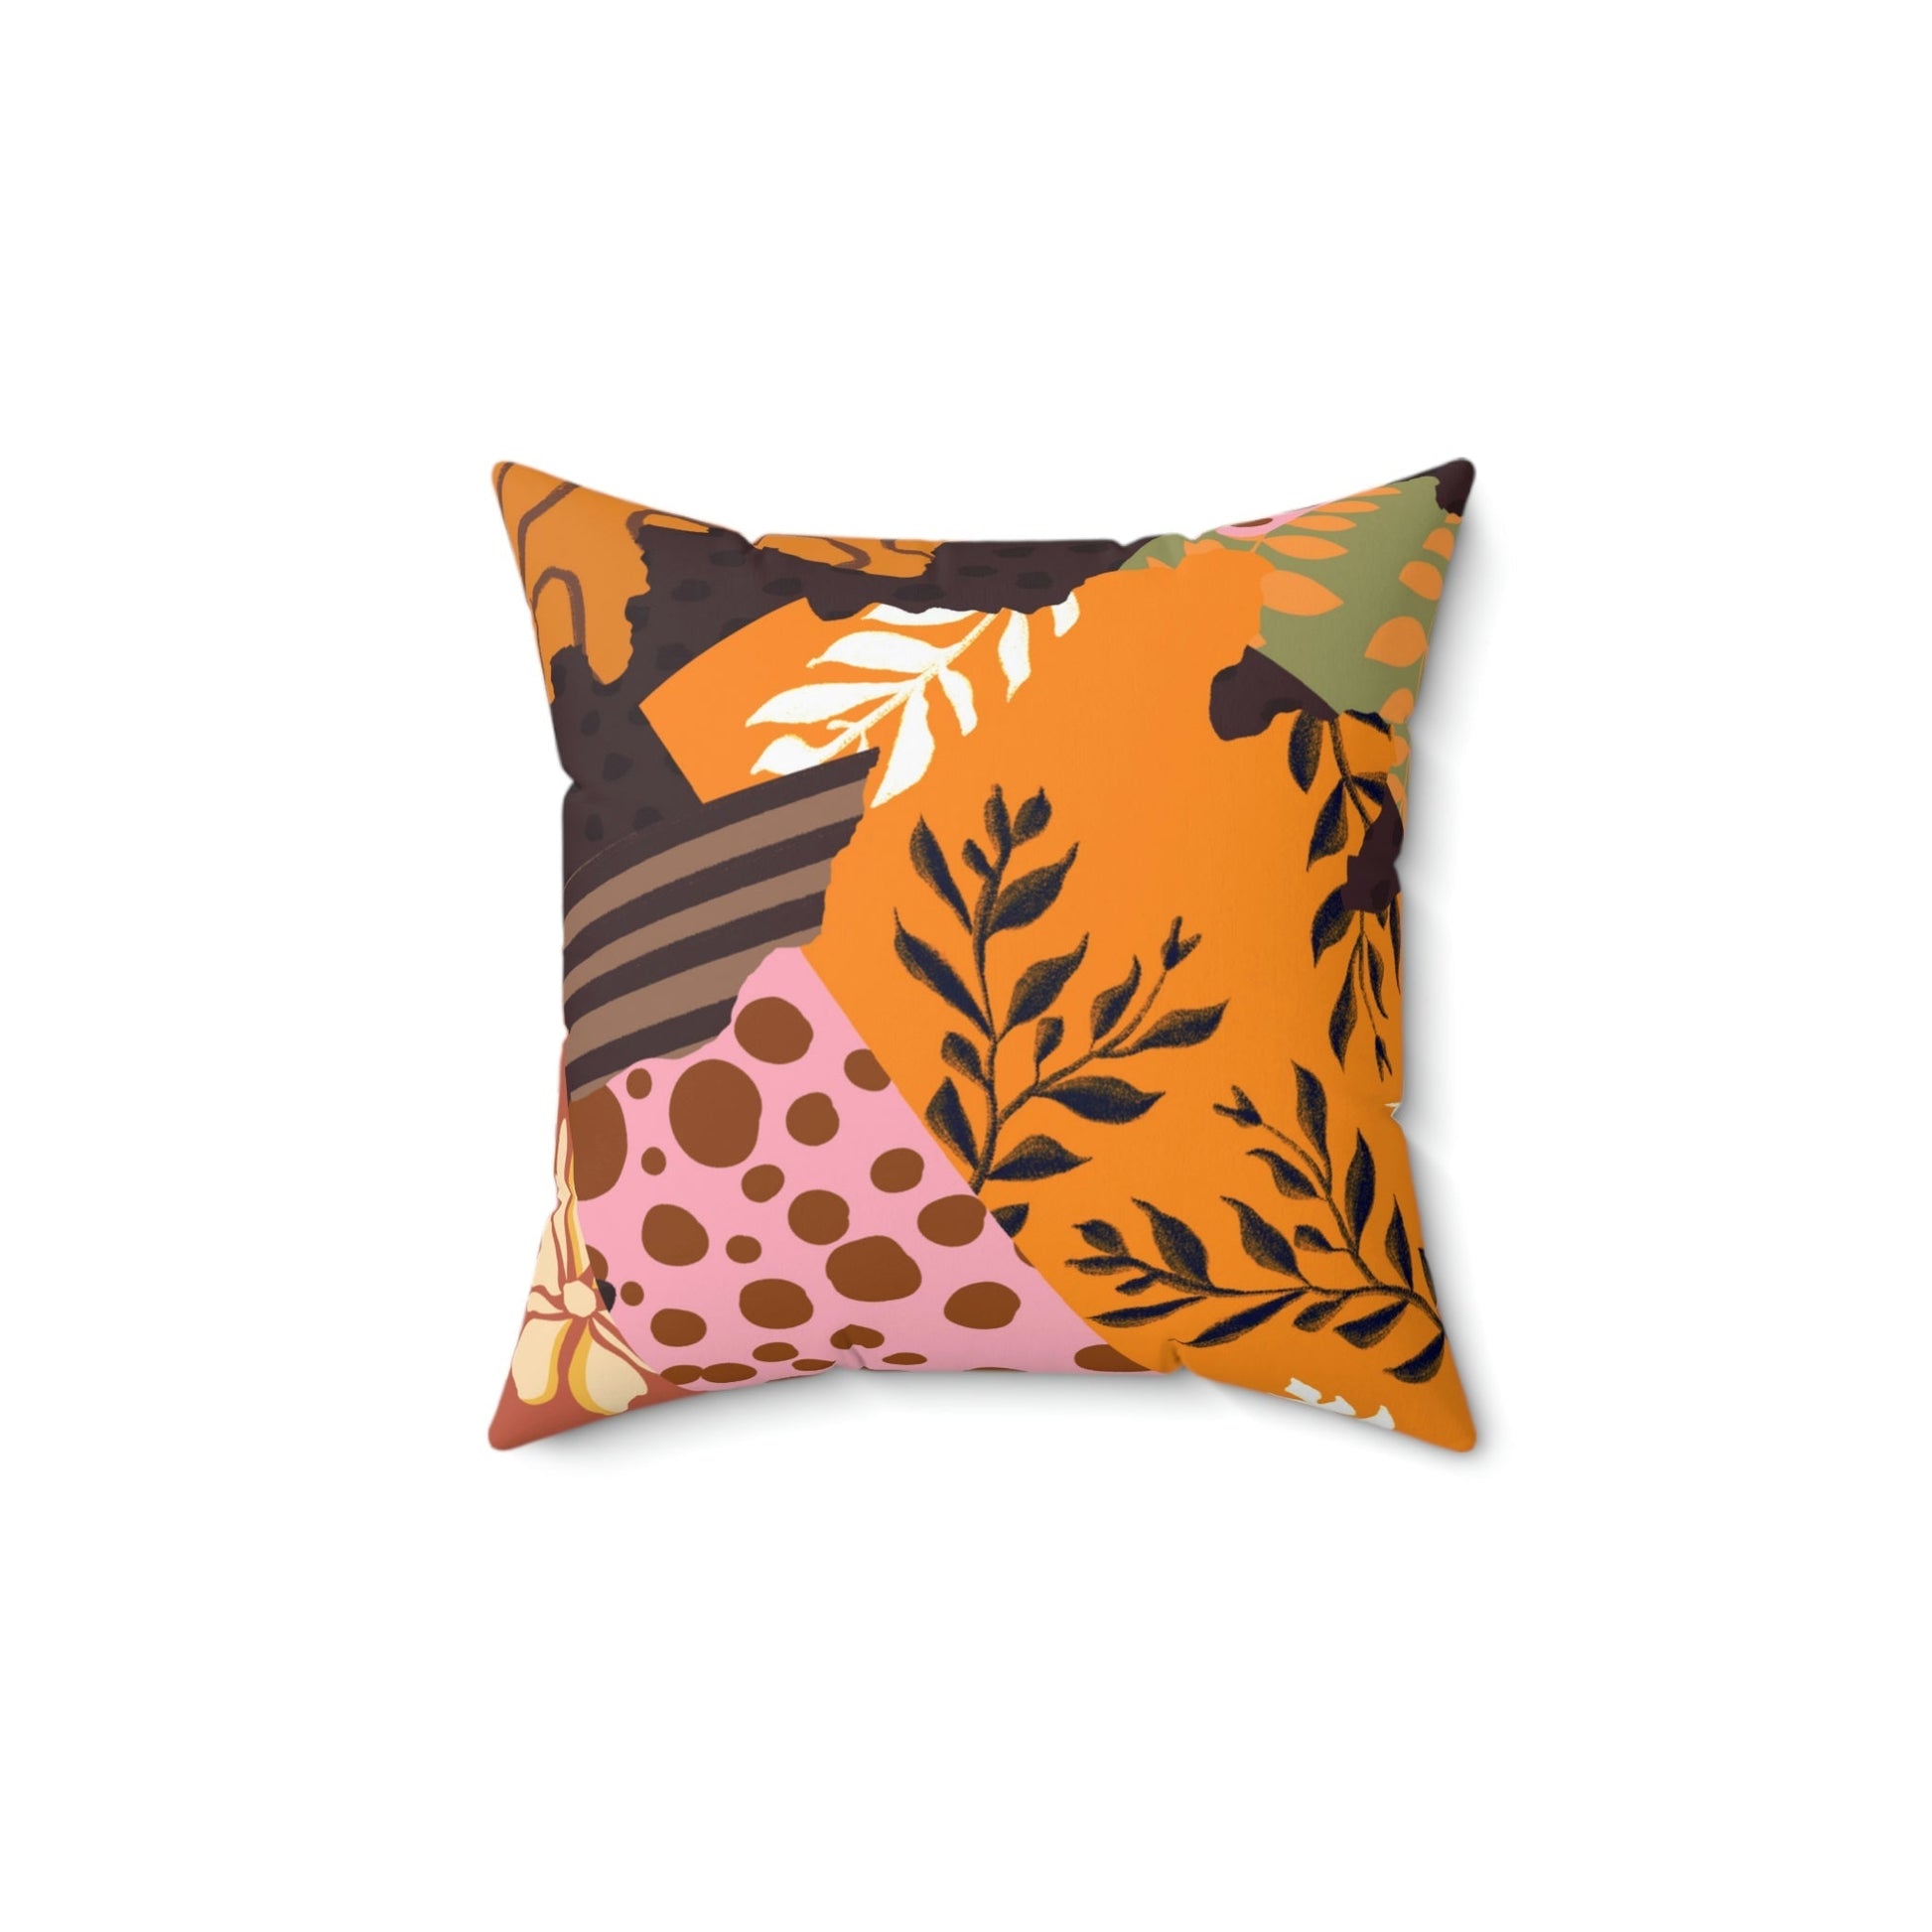 Falling in Love Autumn Square Pillow Home Decor Pink Sweetheart